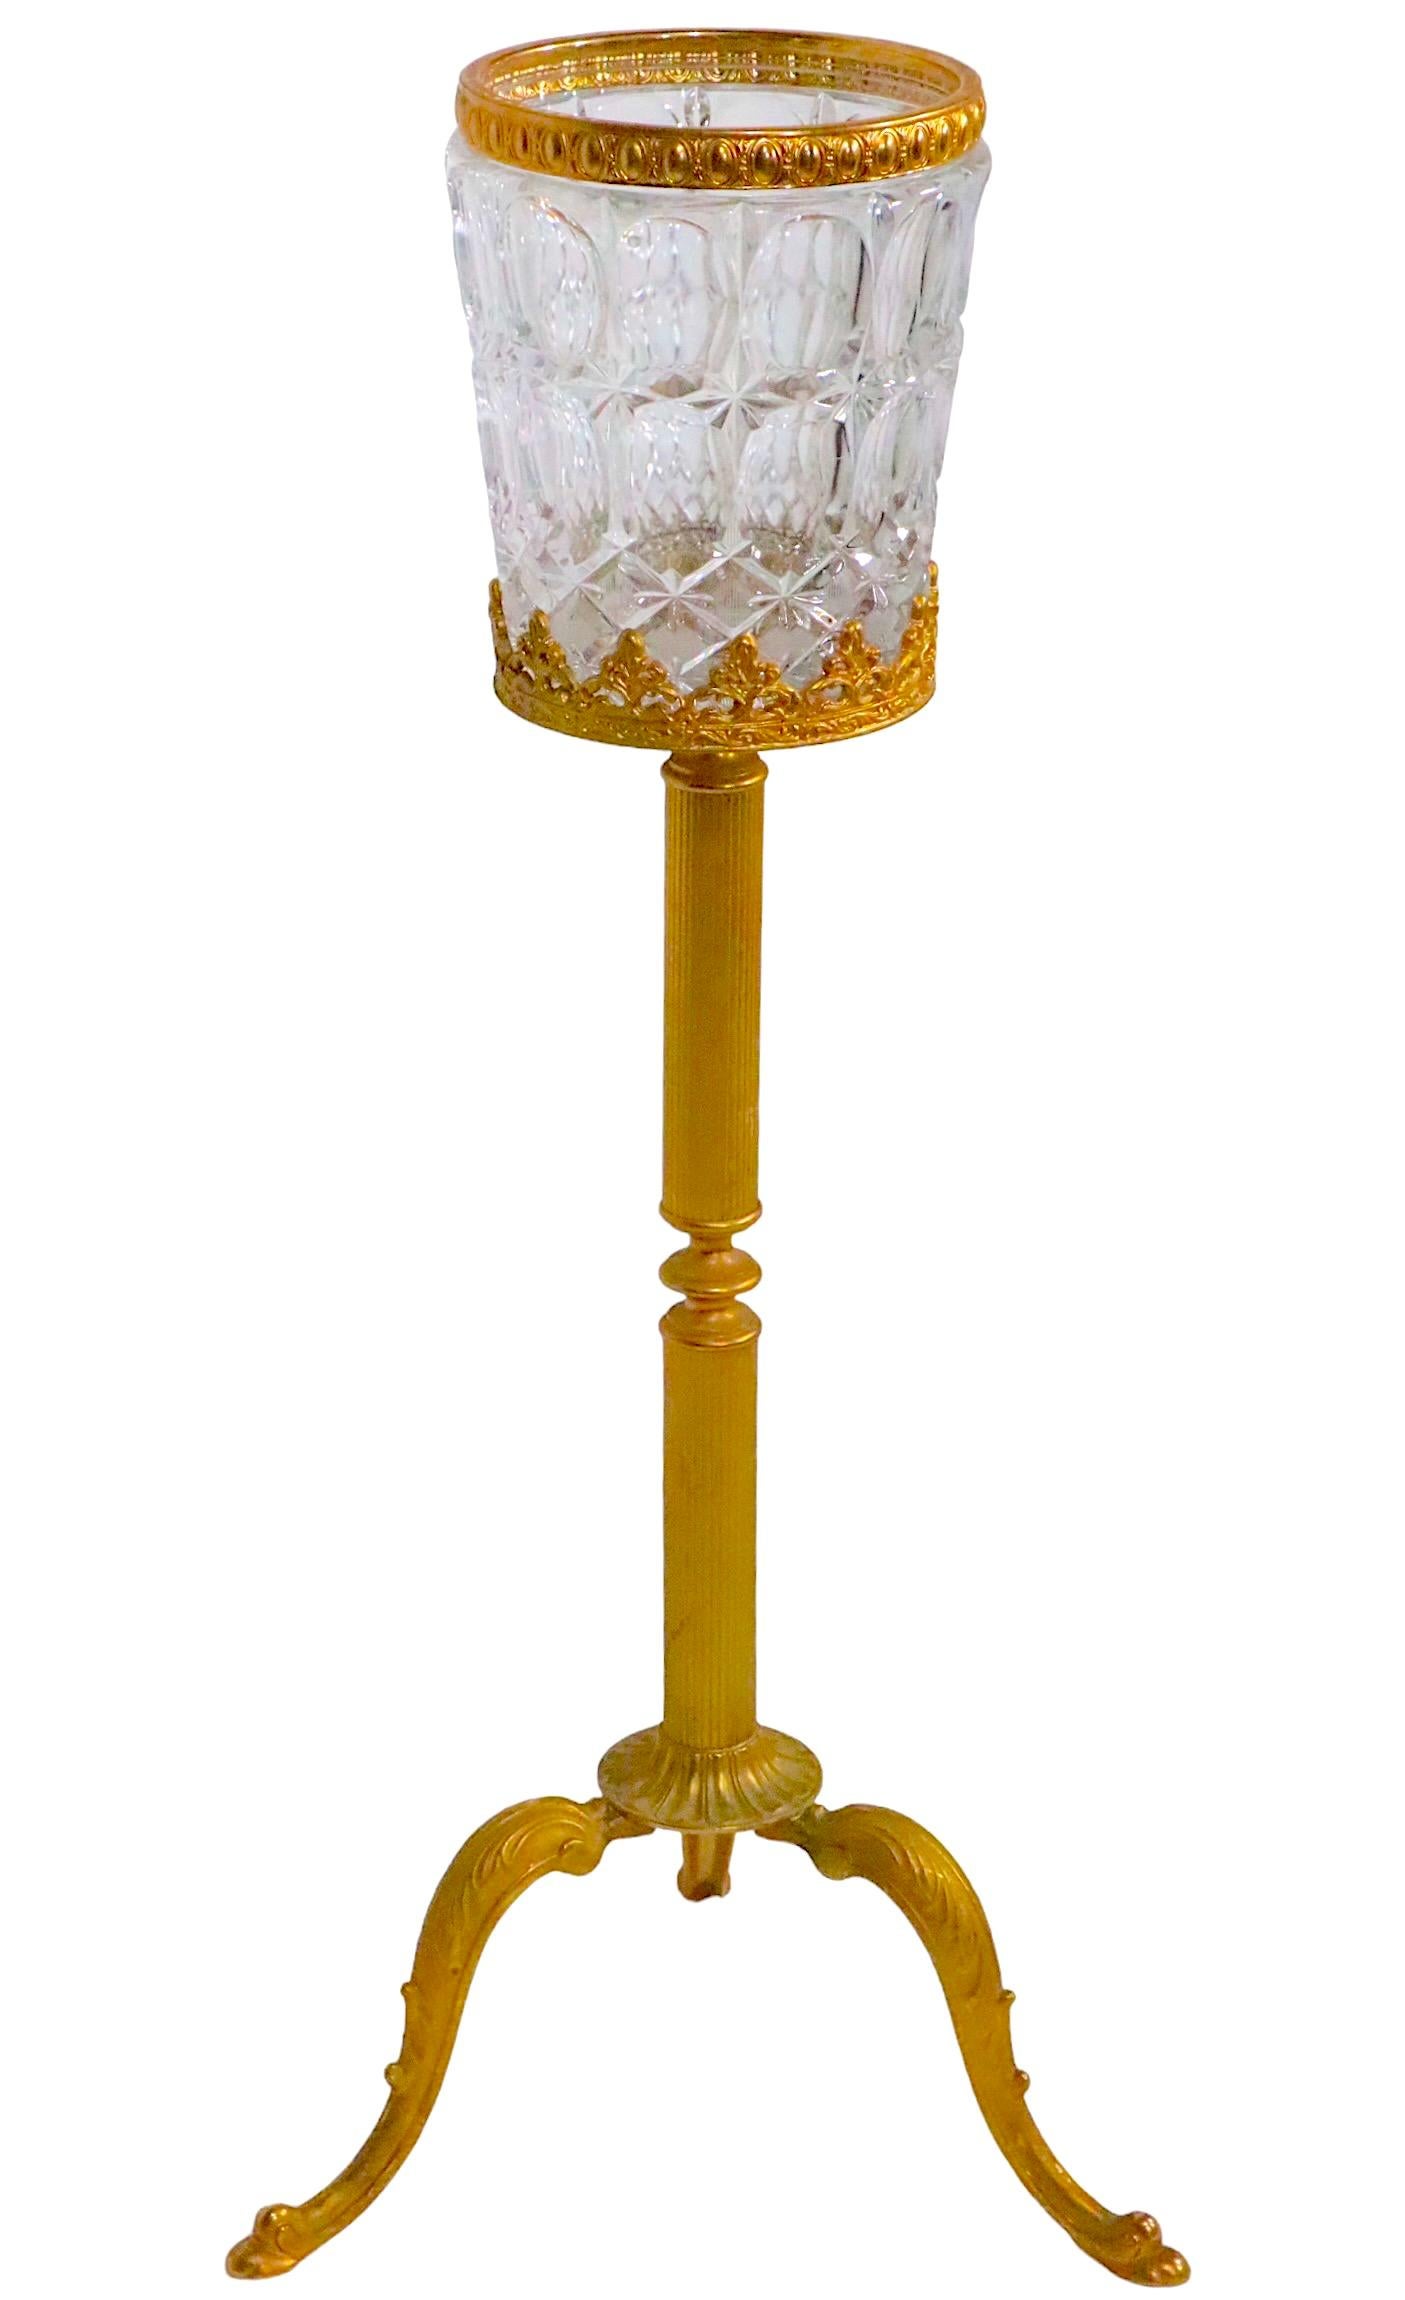   Hollywood Regency Faux Gold Gilt Brass Glass Champagne Wine Cooler with Stand  3